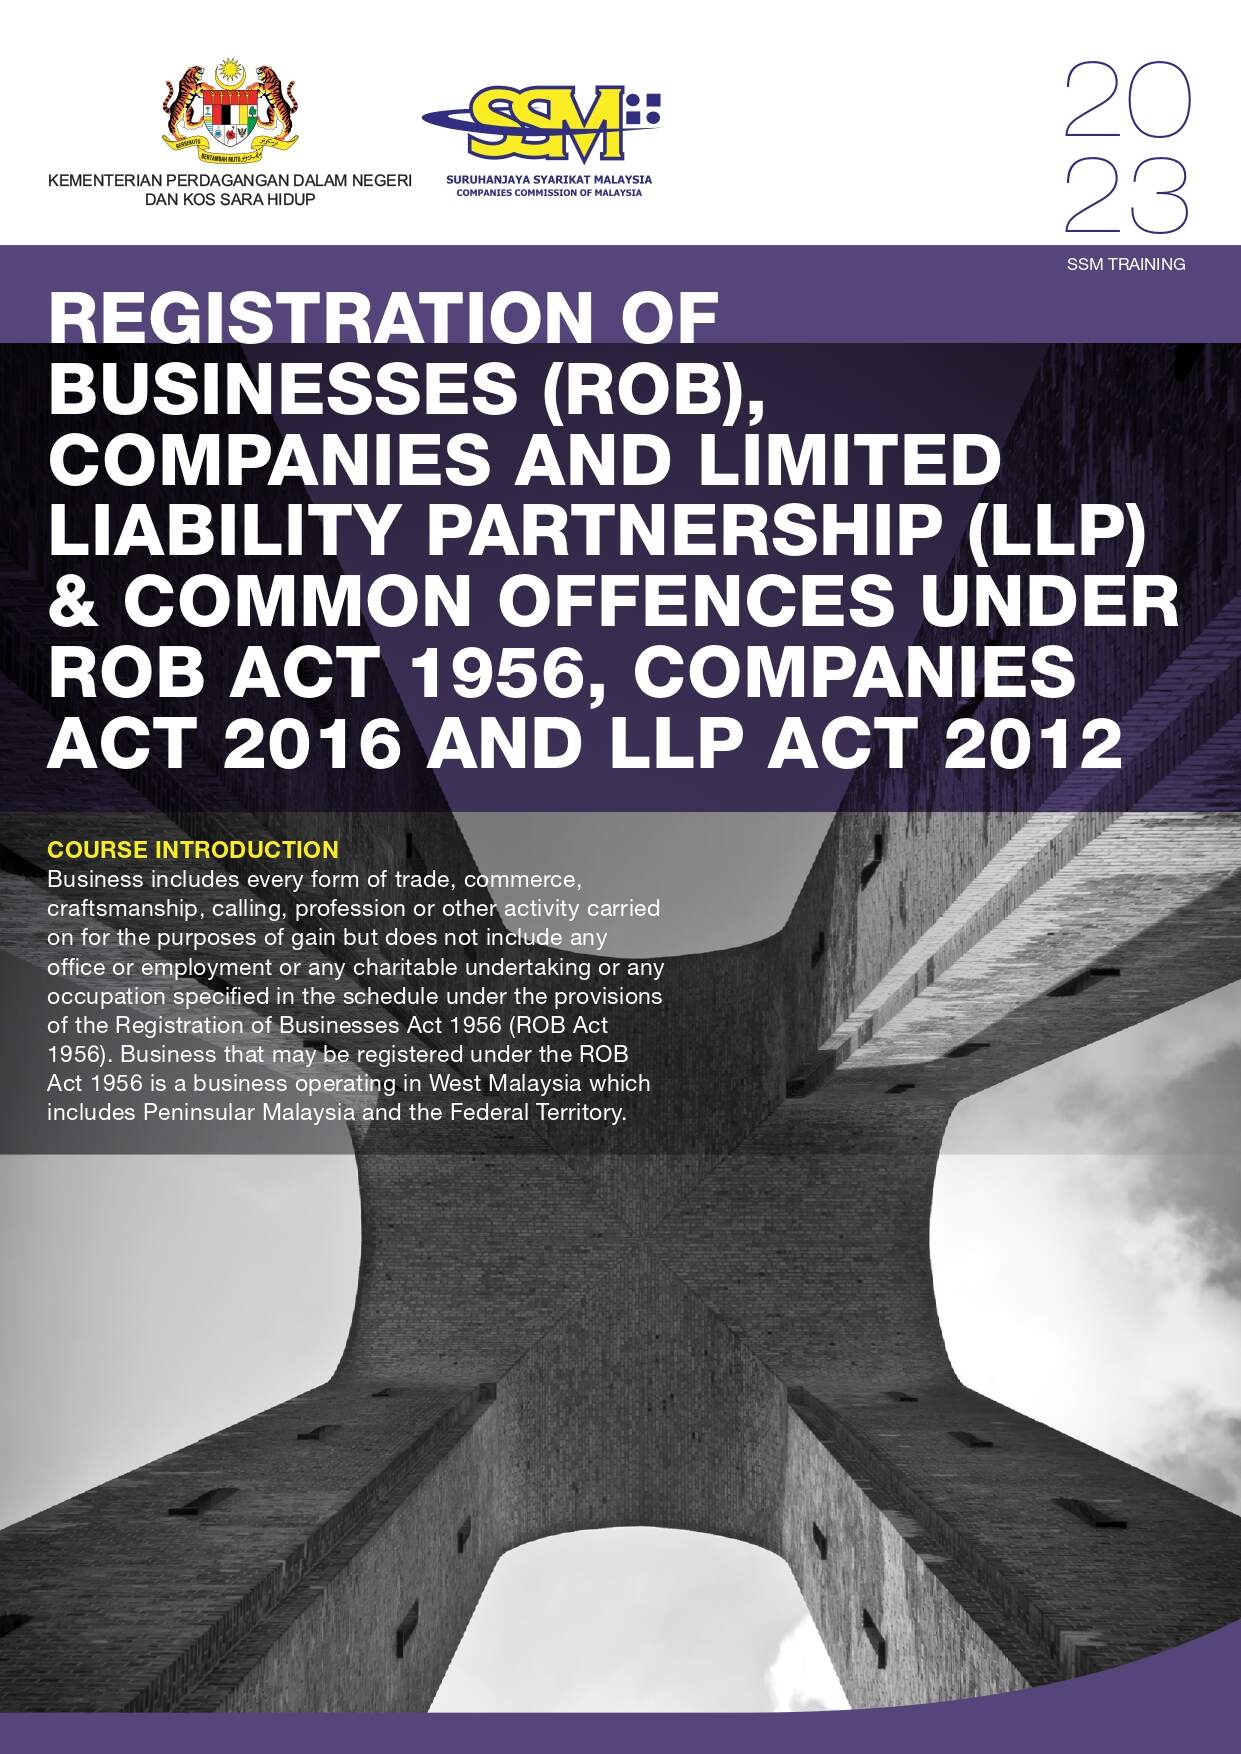 REGISTRATION OF BUSINESS (ROB), COMPANIES AND LIMITED LLP & COMMON OFFENCES UNDER ROB ACT 1956, COMPANIES ACT 2016 AND LLP ACT 2_page-0001 (1).jpg